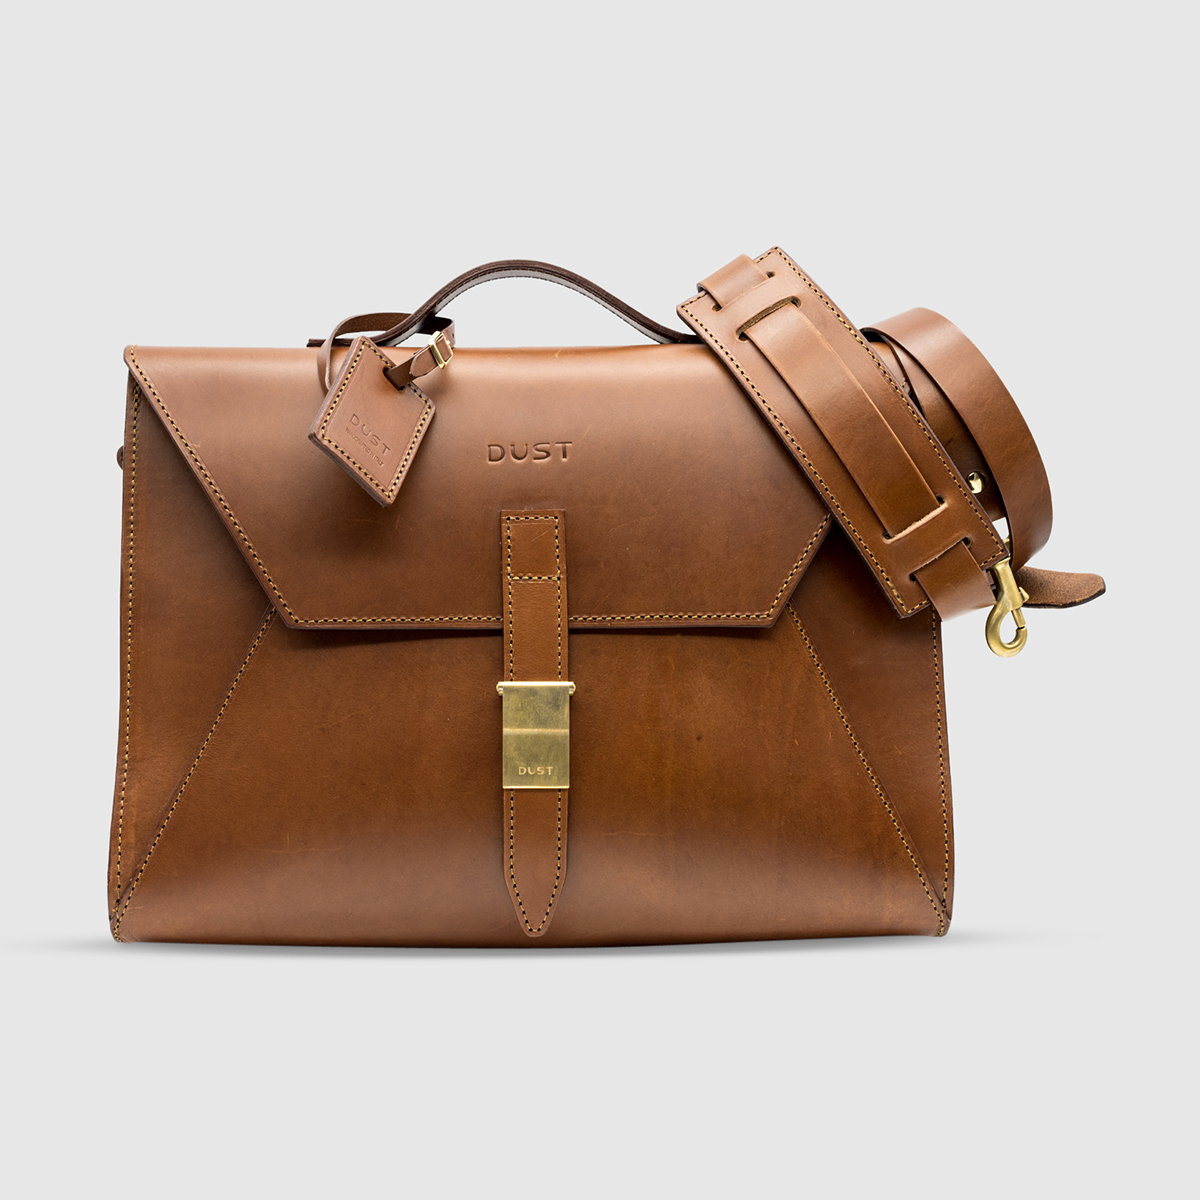 The Dust Company Classic Leather Briefcase